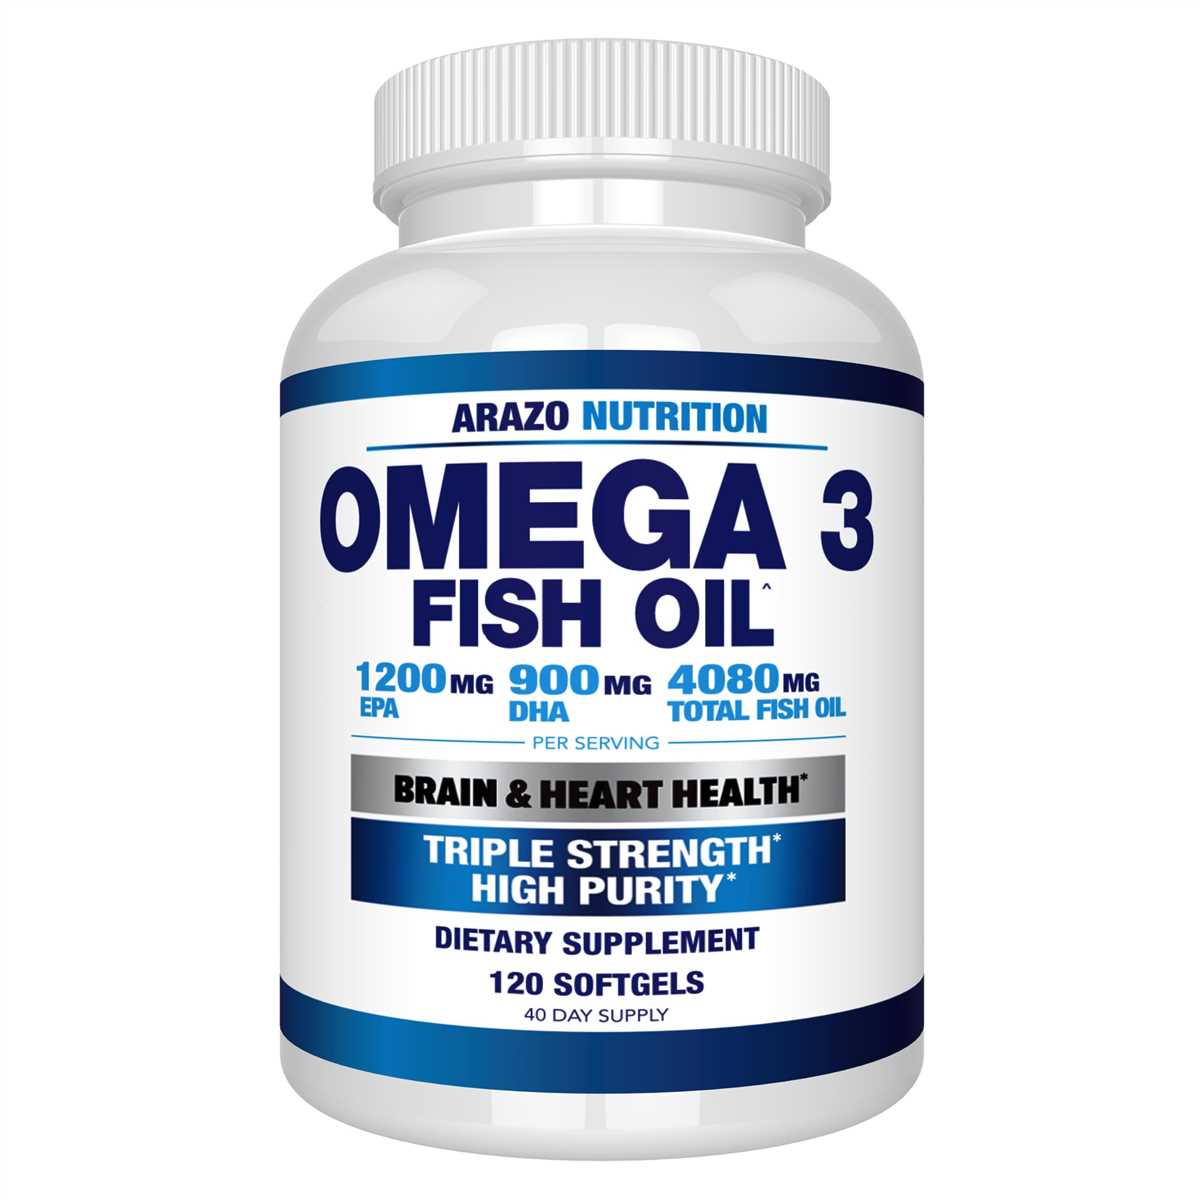 Common sources of fish oil stains